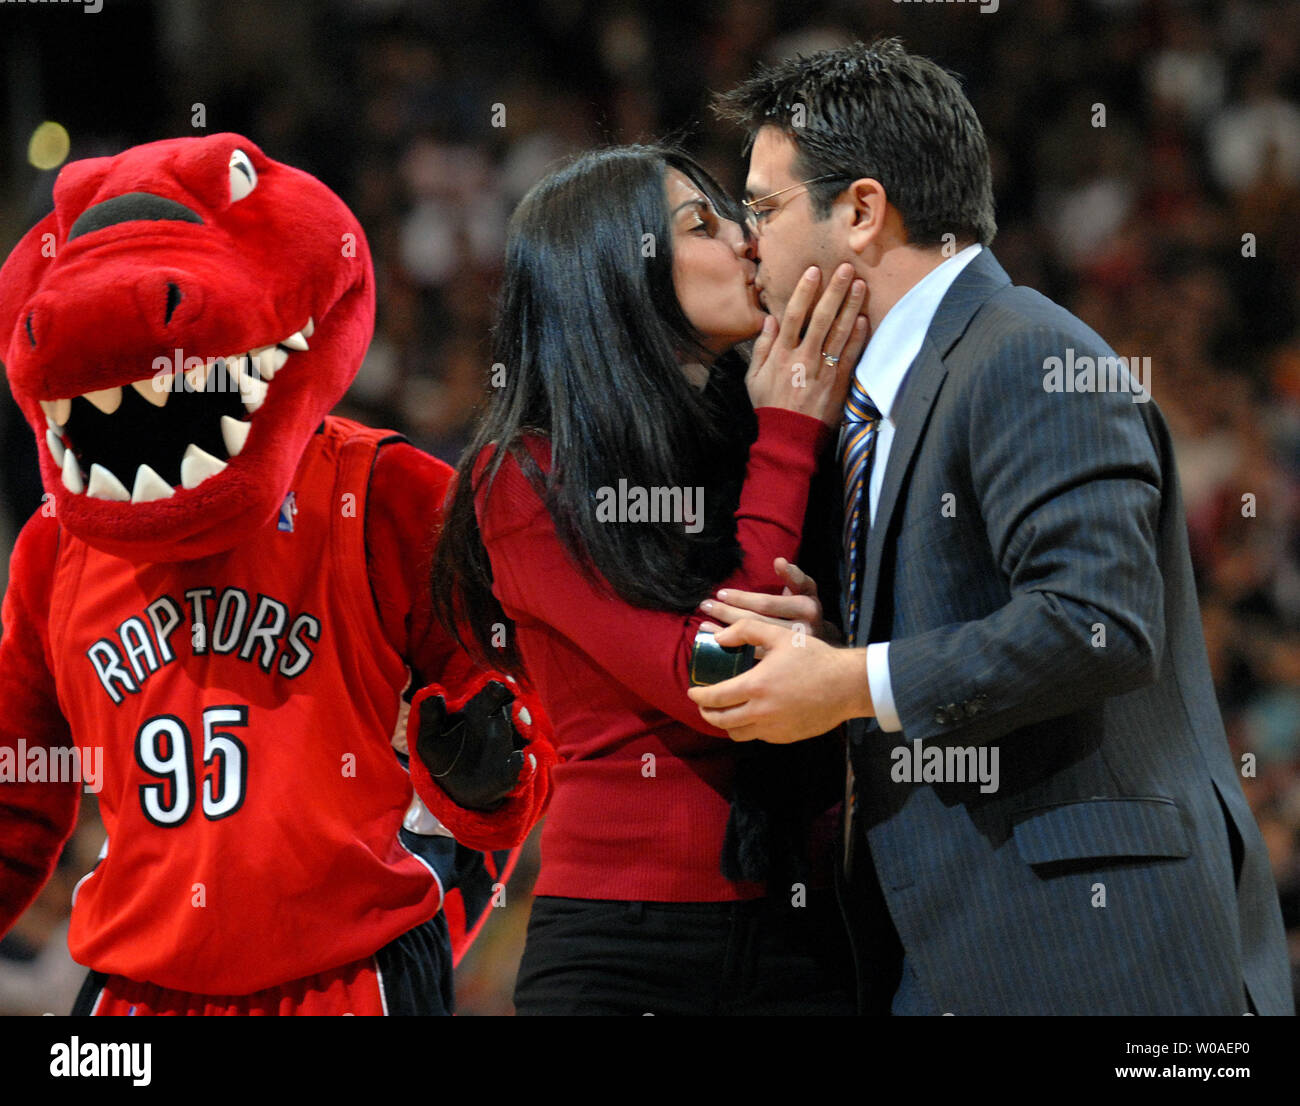 The Raptor mascot walks by to congratulate a couple as they kiss after getting engaged on court during a timeout in the second quarter as the Toronto Raptors host the New Jersey Nets in the Valentine's Day game at the Air Canada Center in Toronto, Canada on February 14, 2007. The Raptors defeated the Nets 120-109. (UPI Photo/Christine Chew) Stock Photo